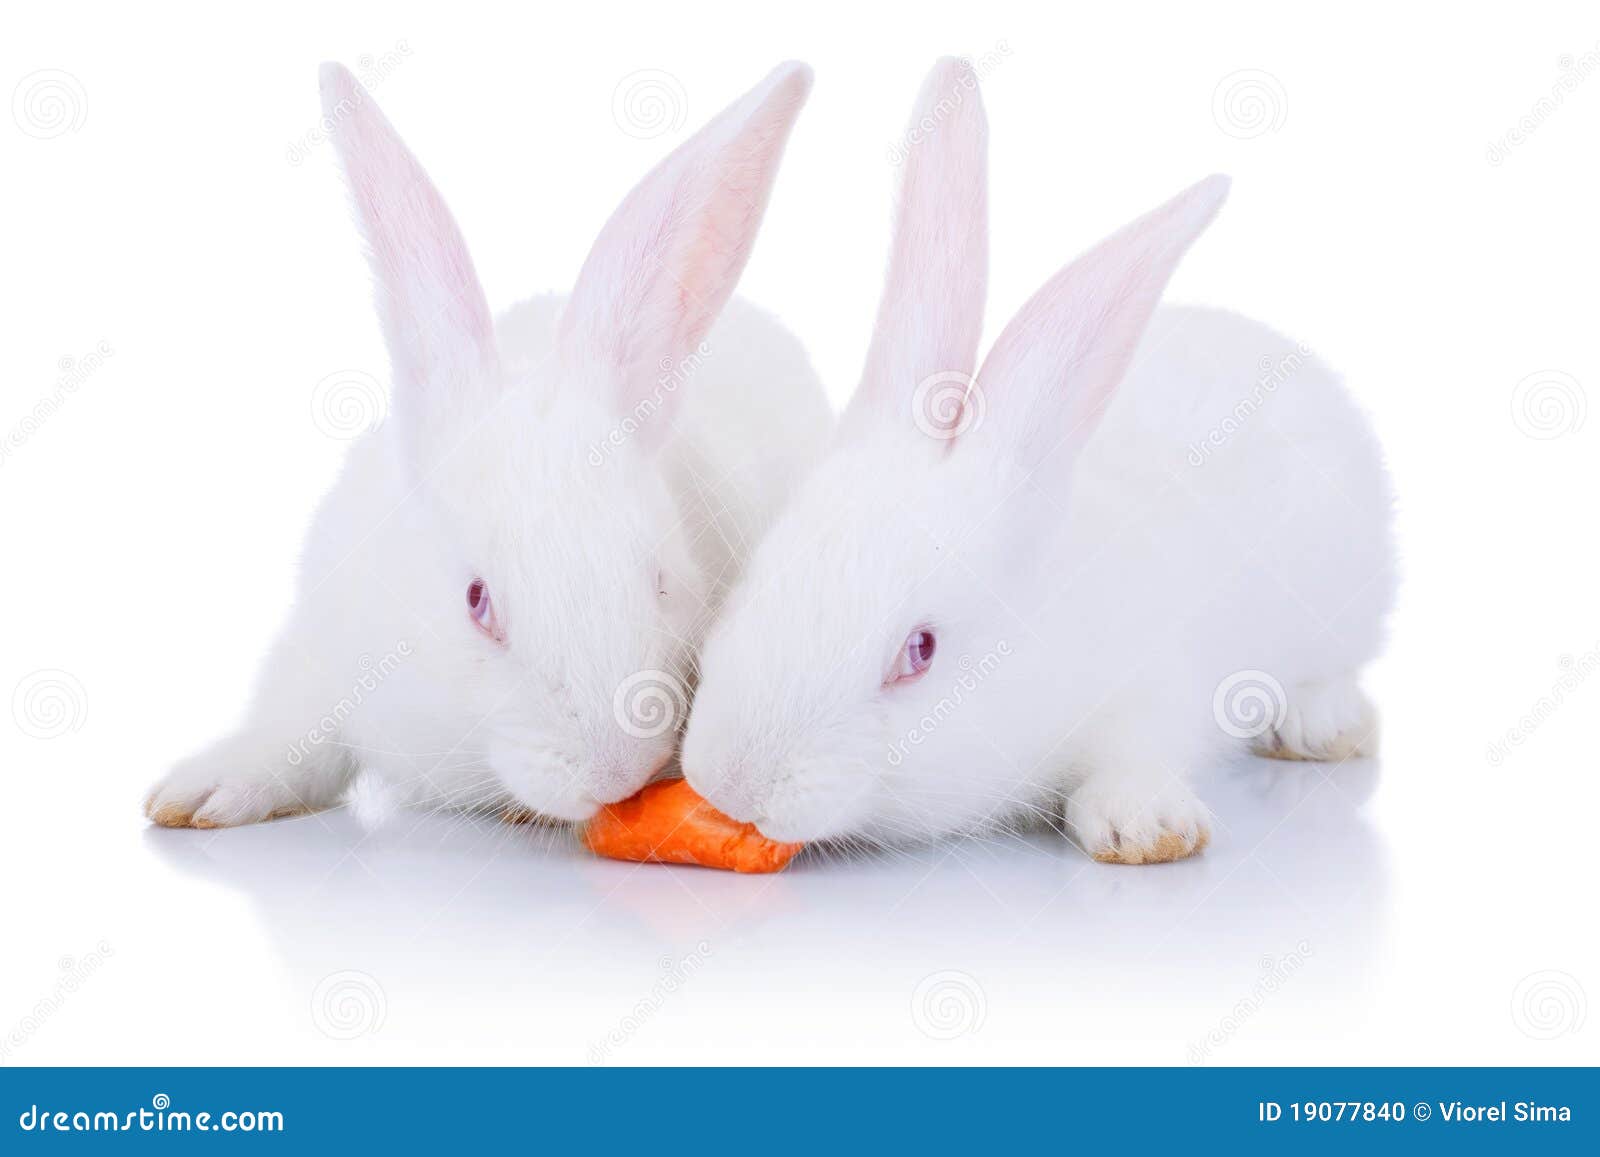 Two Rabbits Eating from One Carrot Stock Photo - Image of front, view